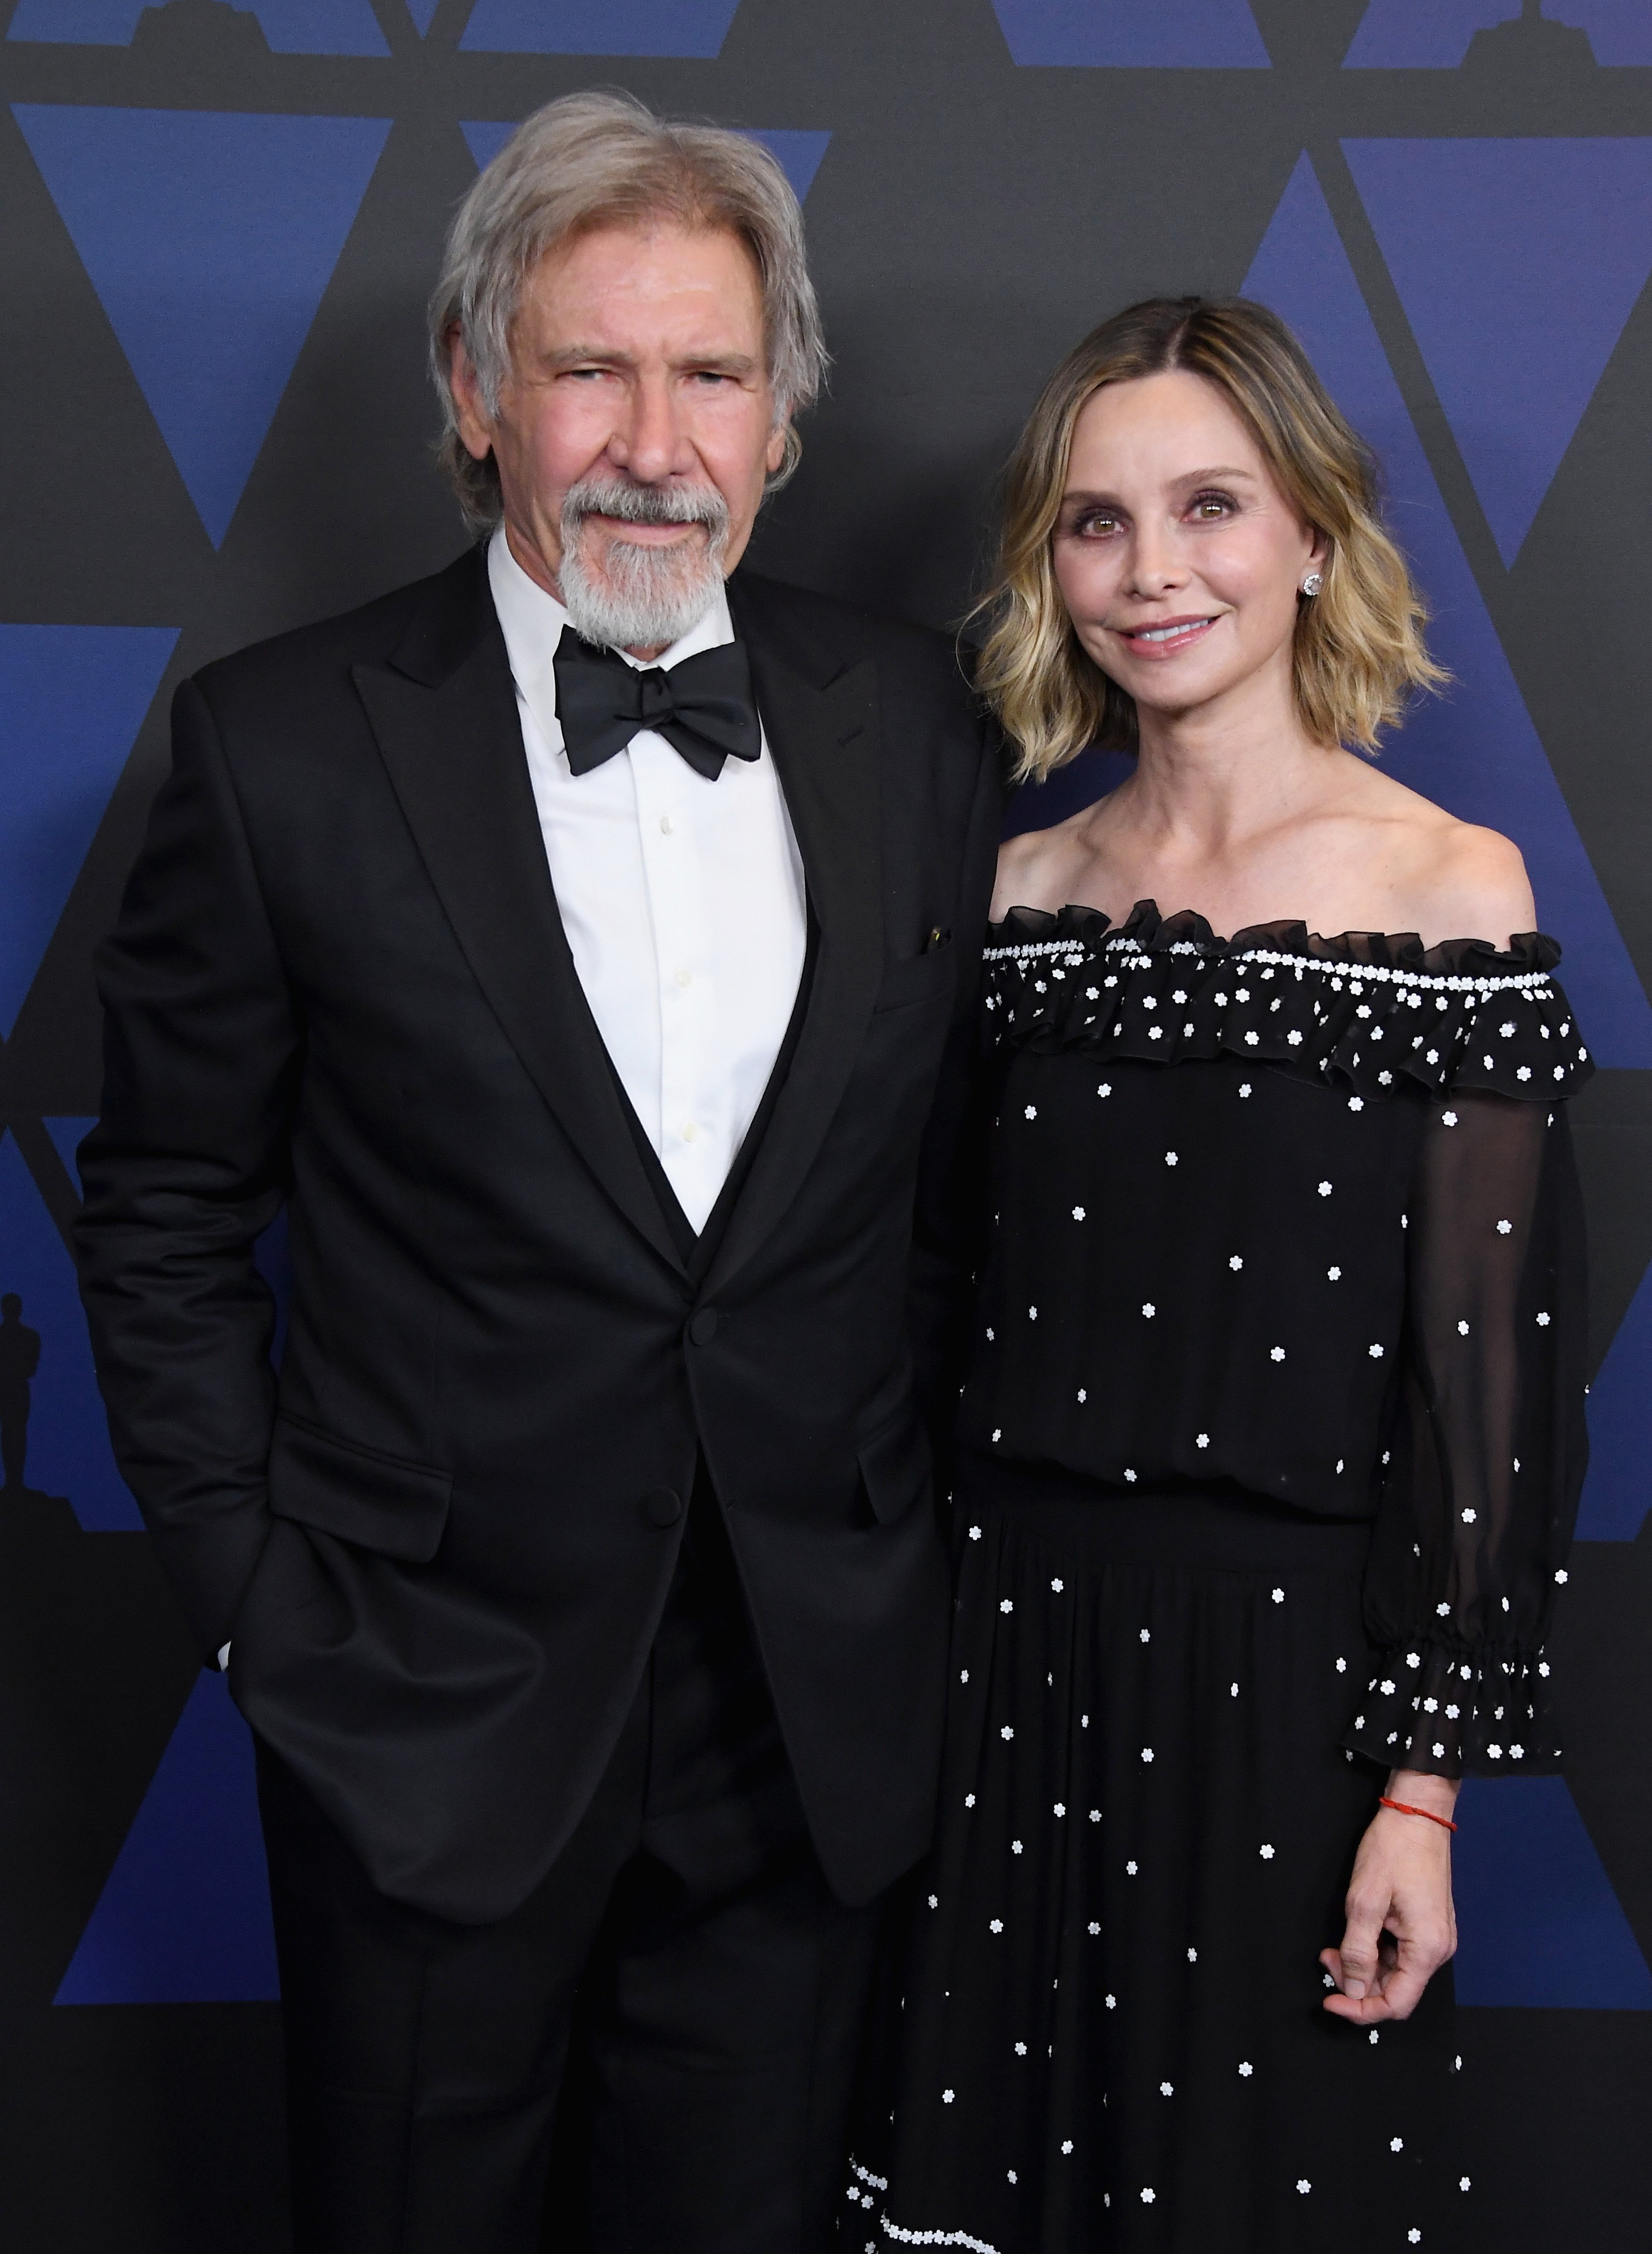 Harrison Ford and Calista Flockhart at the Academy of Motion Picture Arts and Sciences' 10th annual Governors Awards on November 18, 2018, in Hollywood, California. | Source: Getty Images